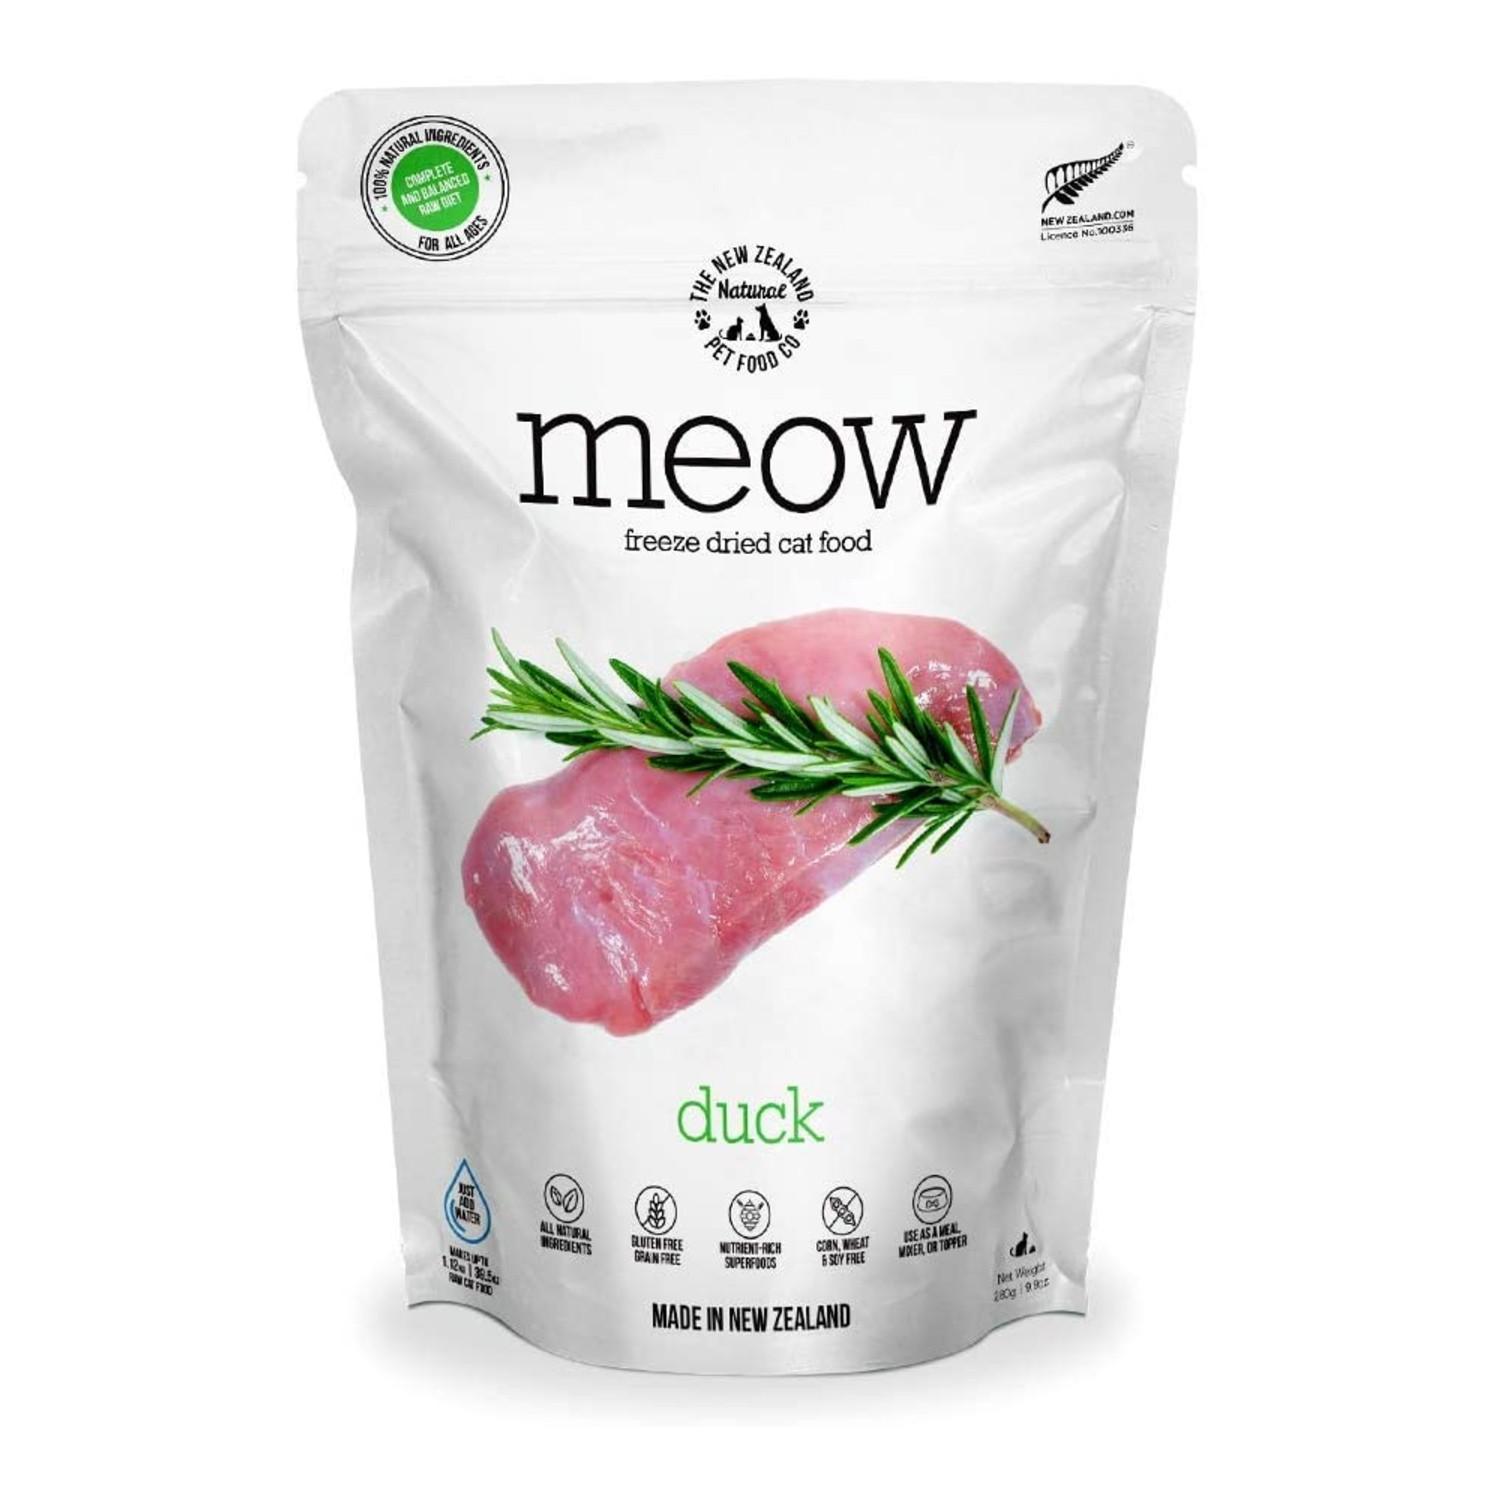 The New Zealand Natural Pet Food Co. Meow Freeze Dried Cat Food - Duck